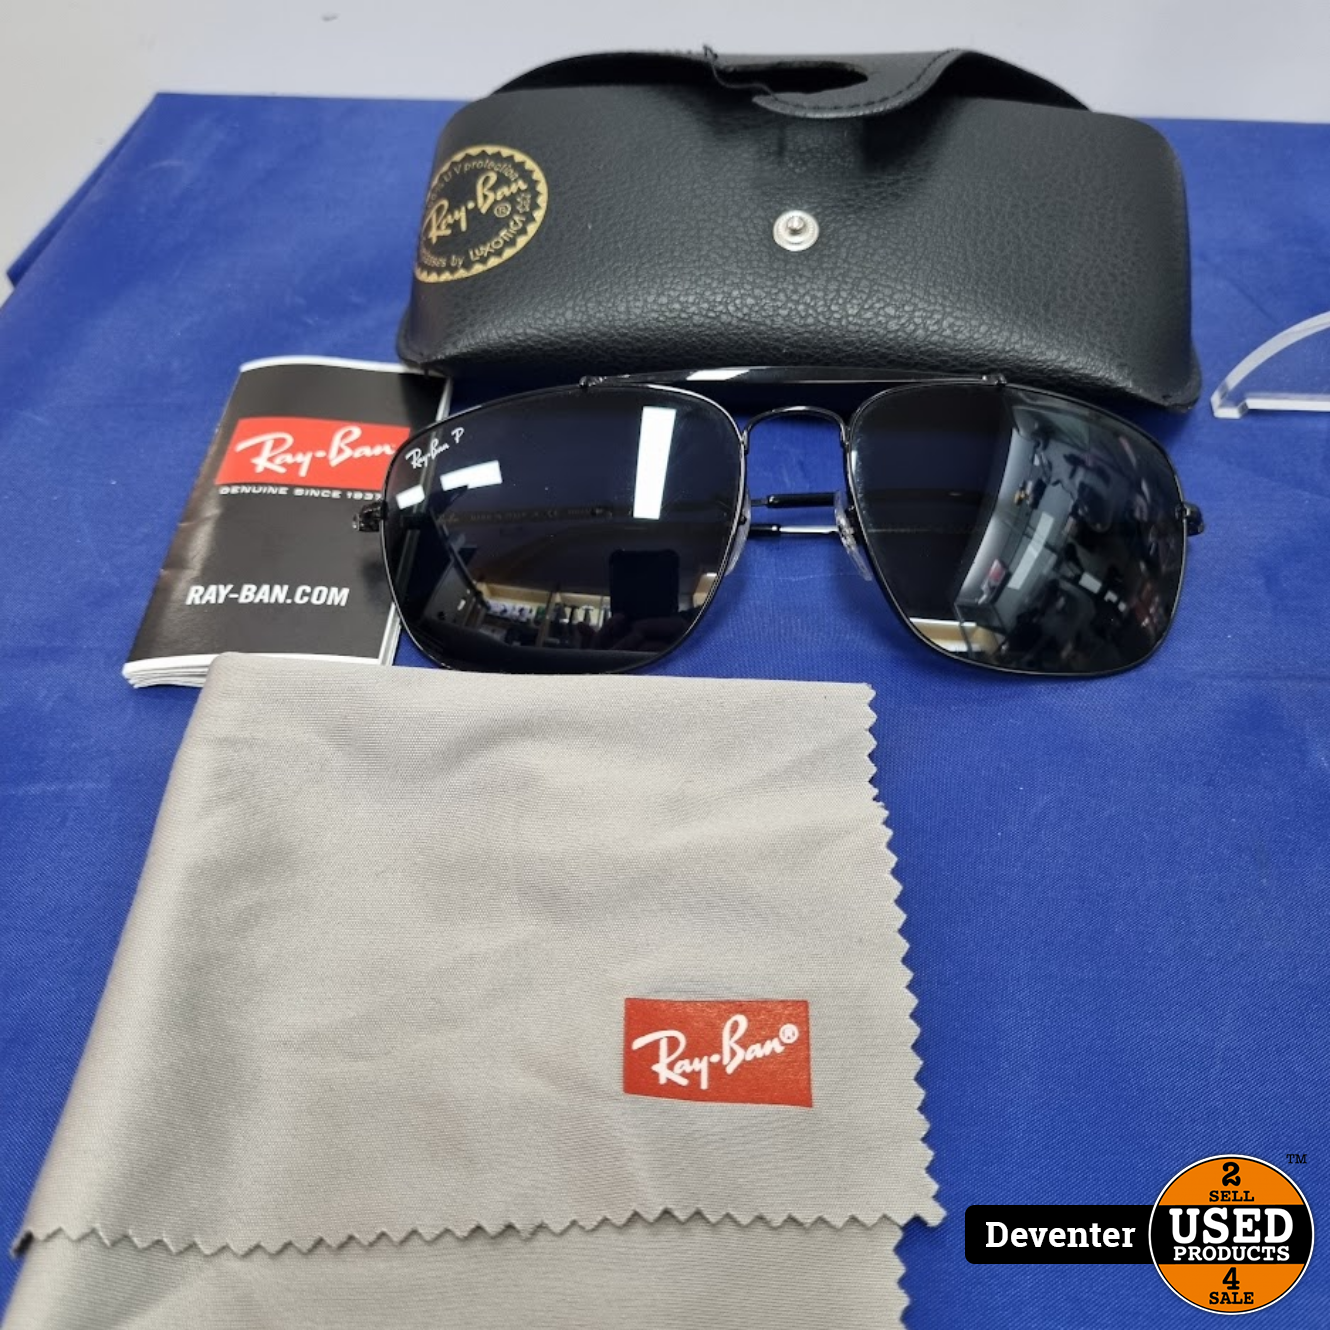 lotus varkensvlees Overleving RayBan Ray-Ban RB3560 'The Colonel' Polarized Zonnebril zwart - Used  Products Deventer